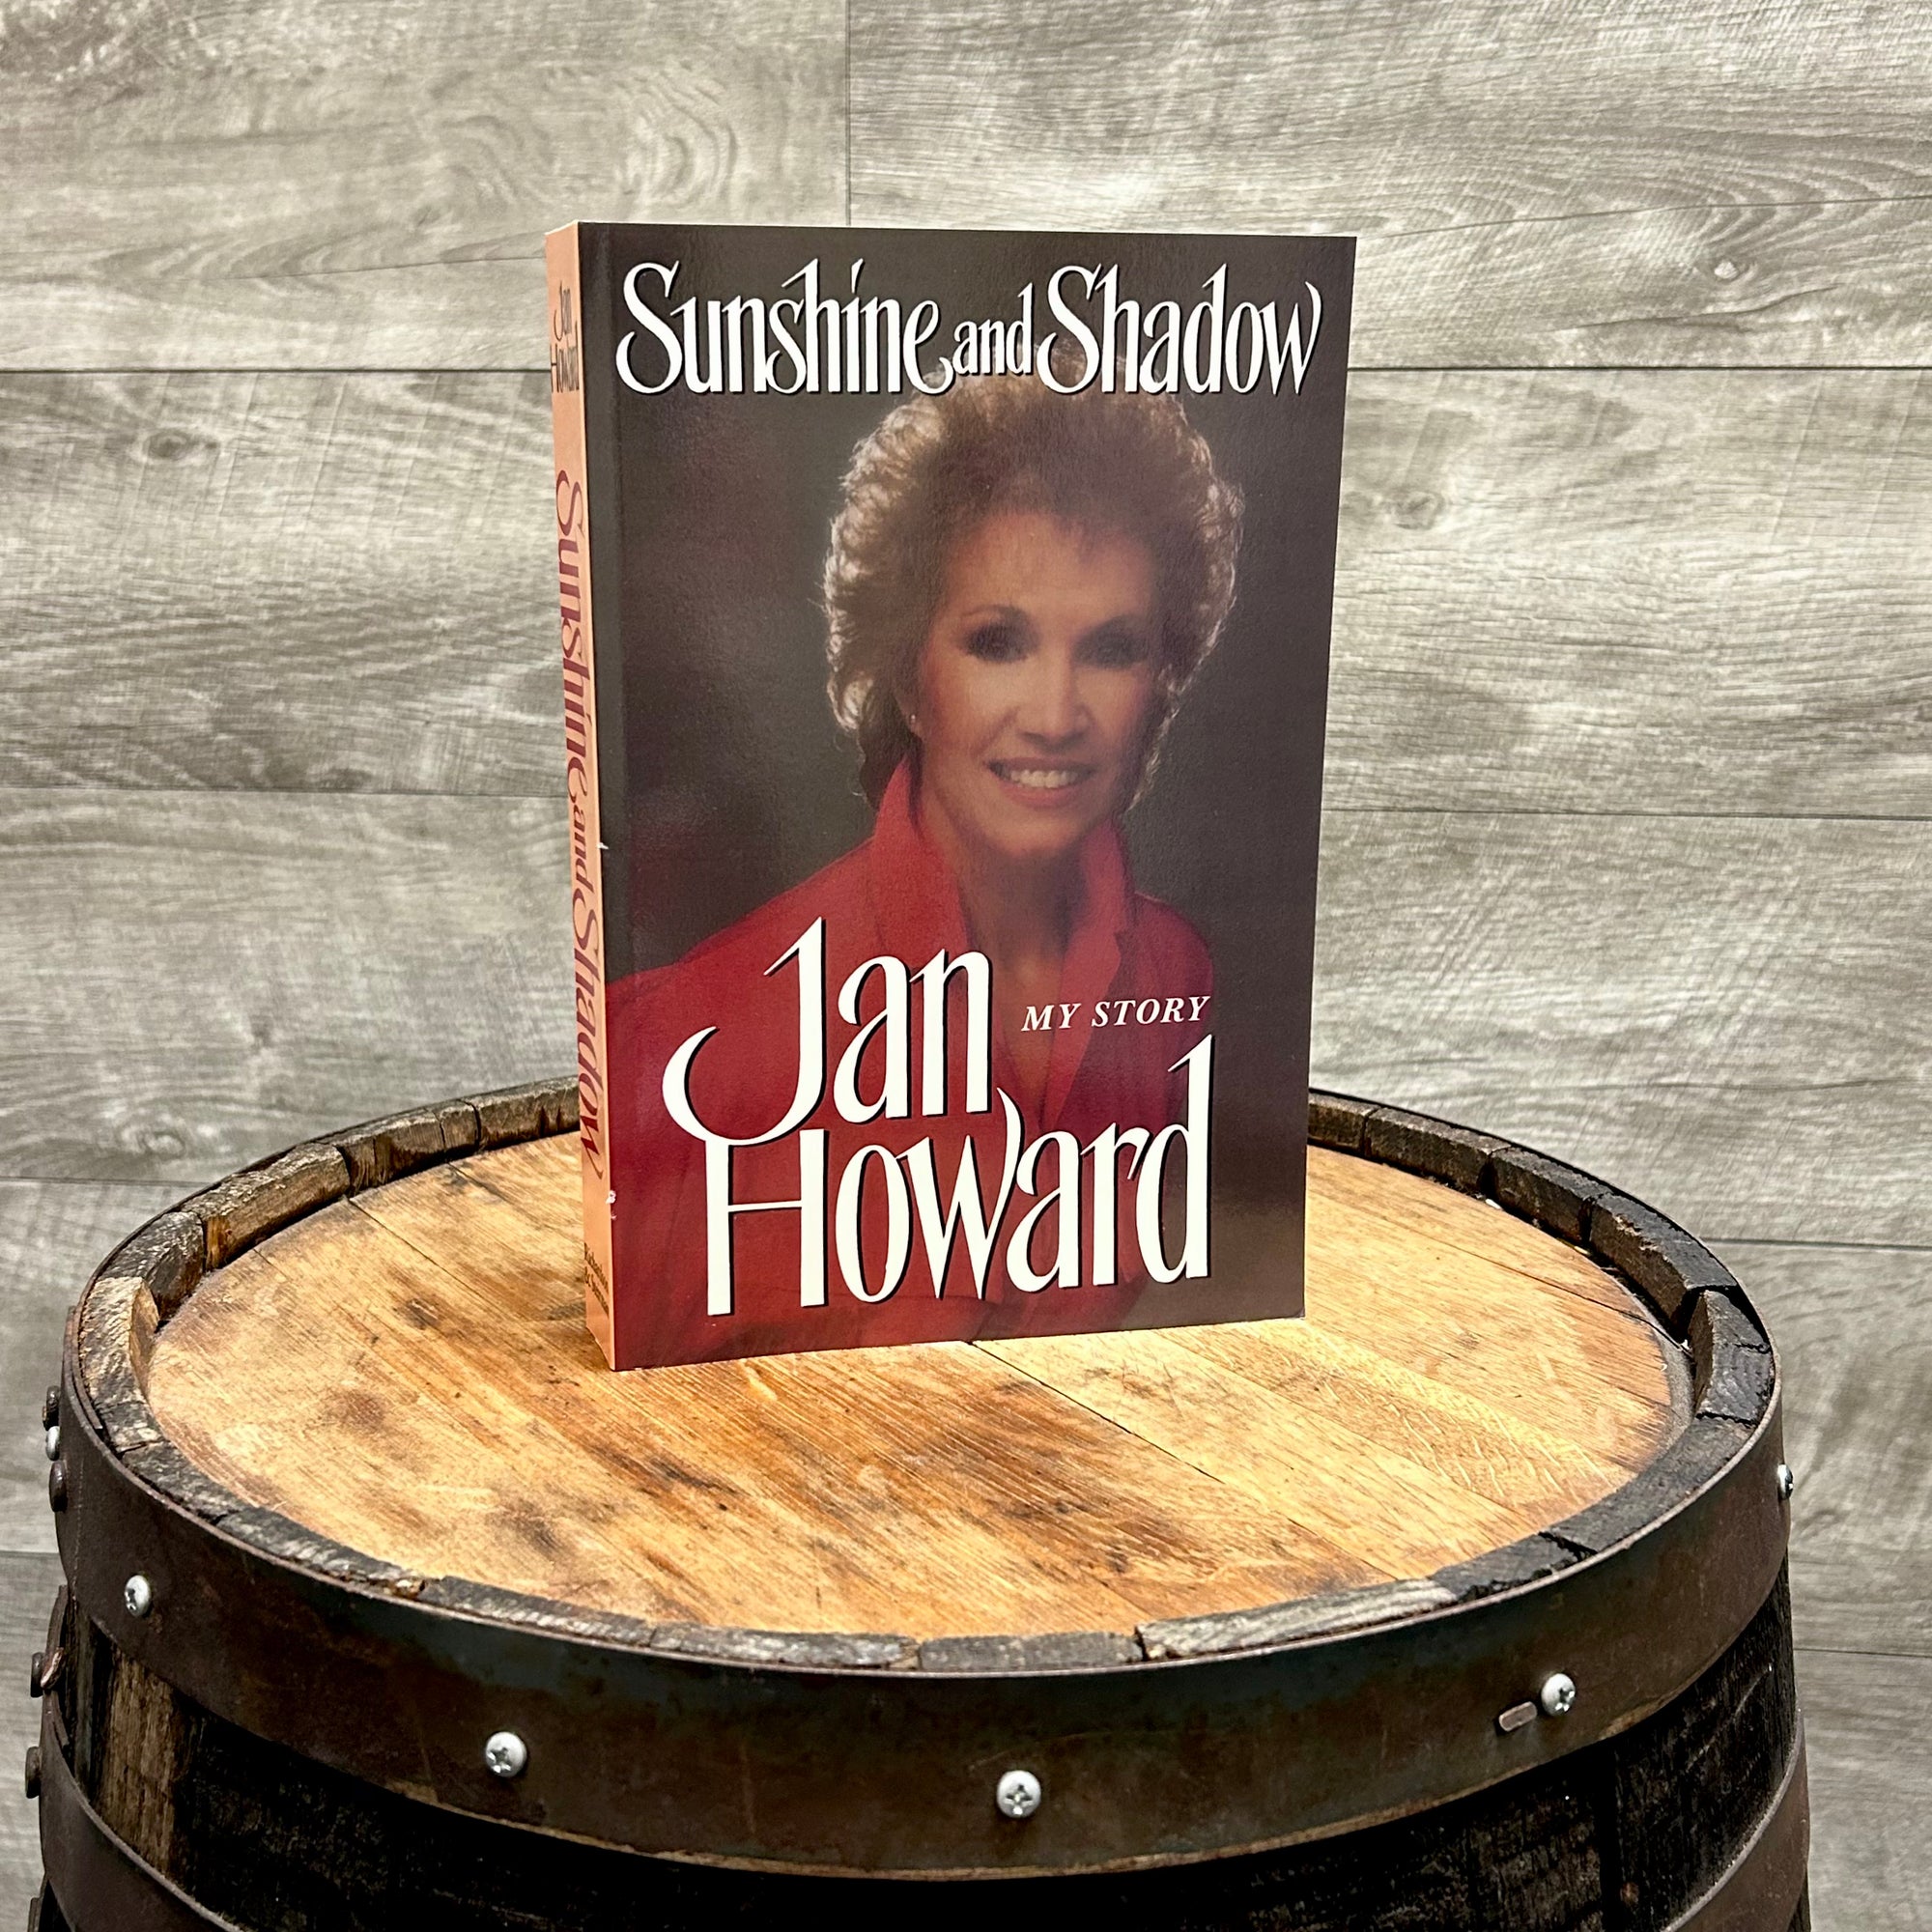 "Sunshine and Shadow" by Jan Howard